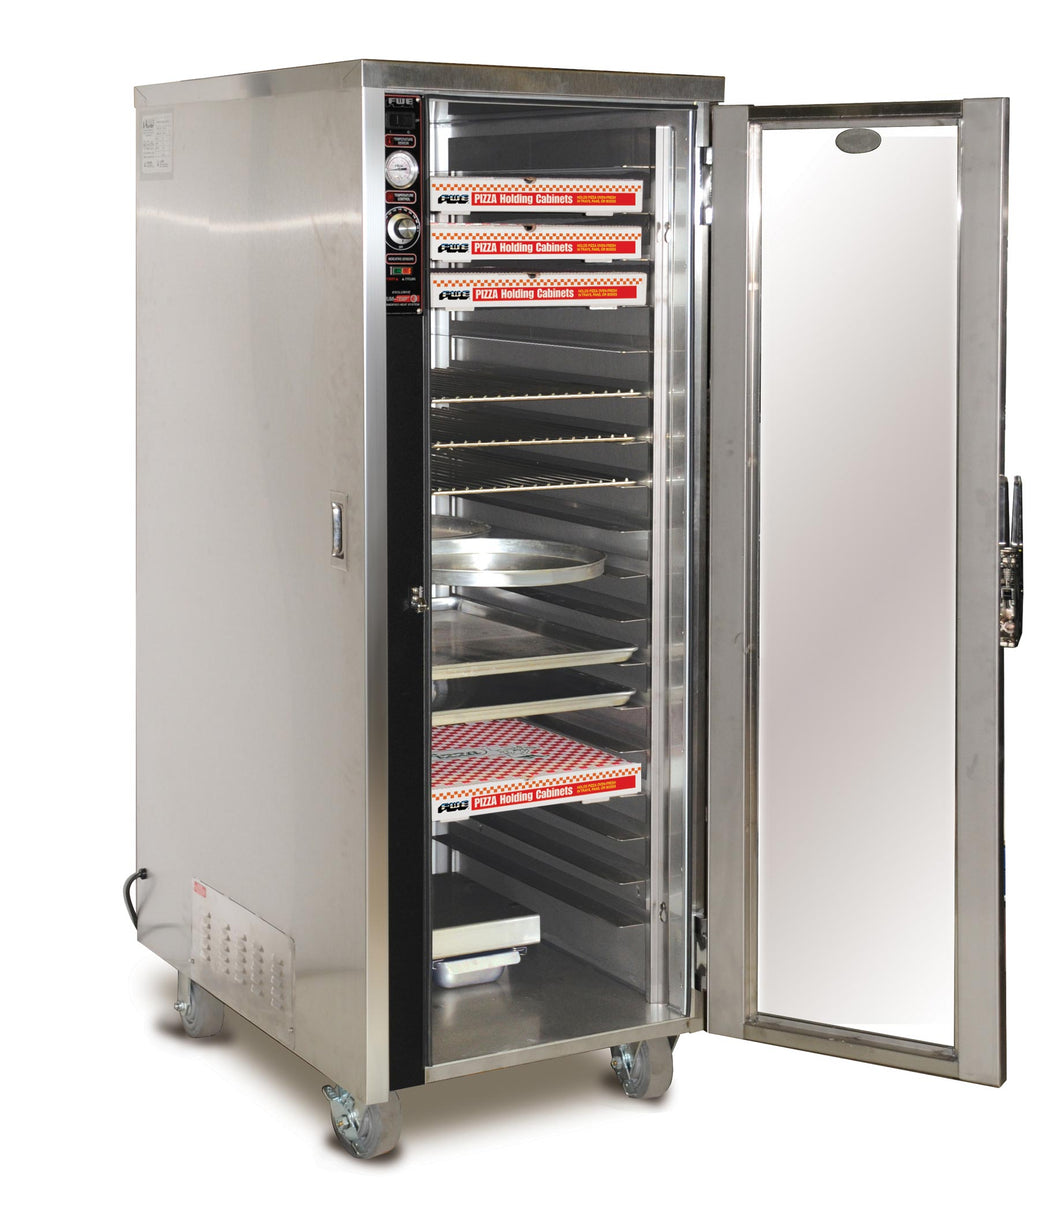 Pizza Heated Holding Cabinets - TS-1633-36L